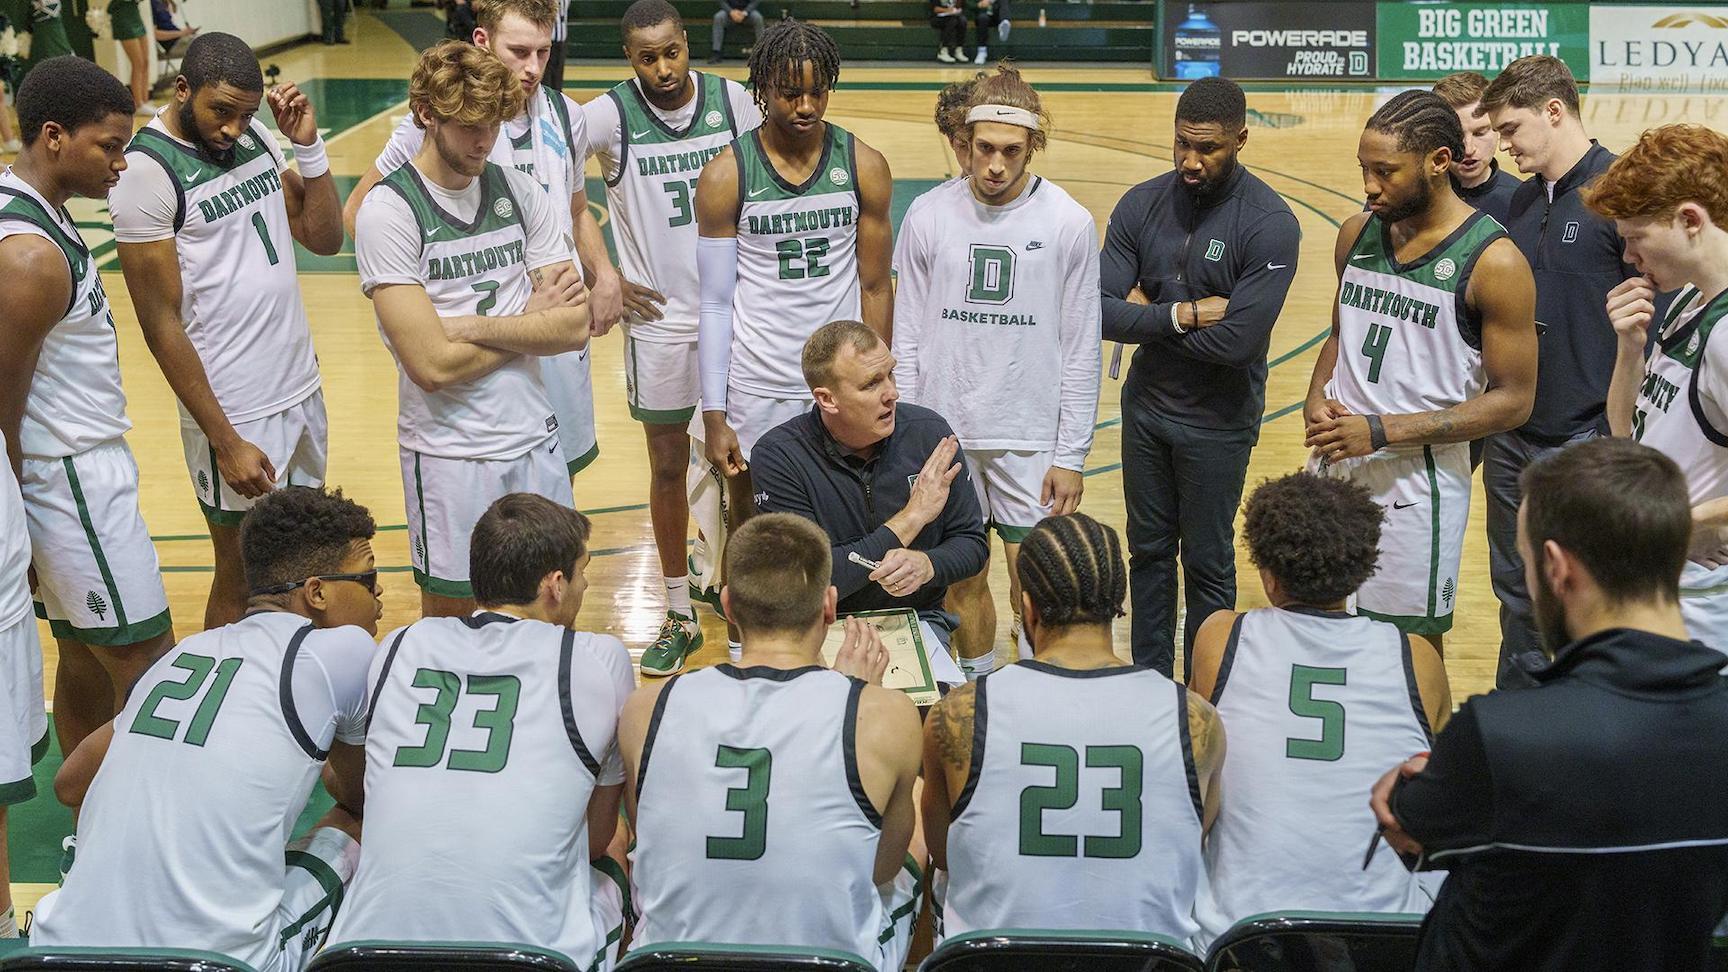 The Dartmouth men's basketball team is attempting to form a union.